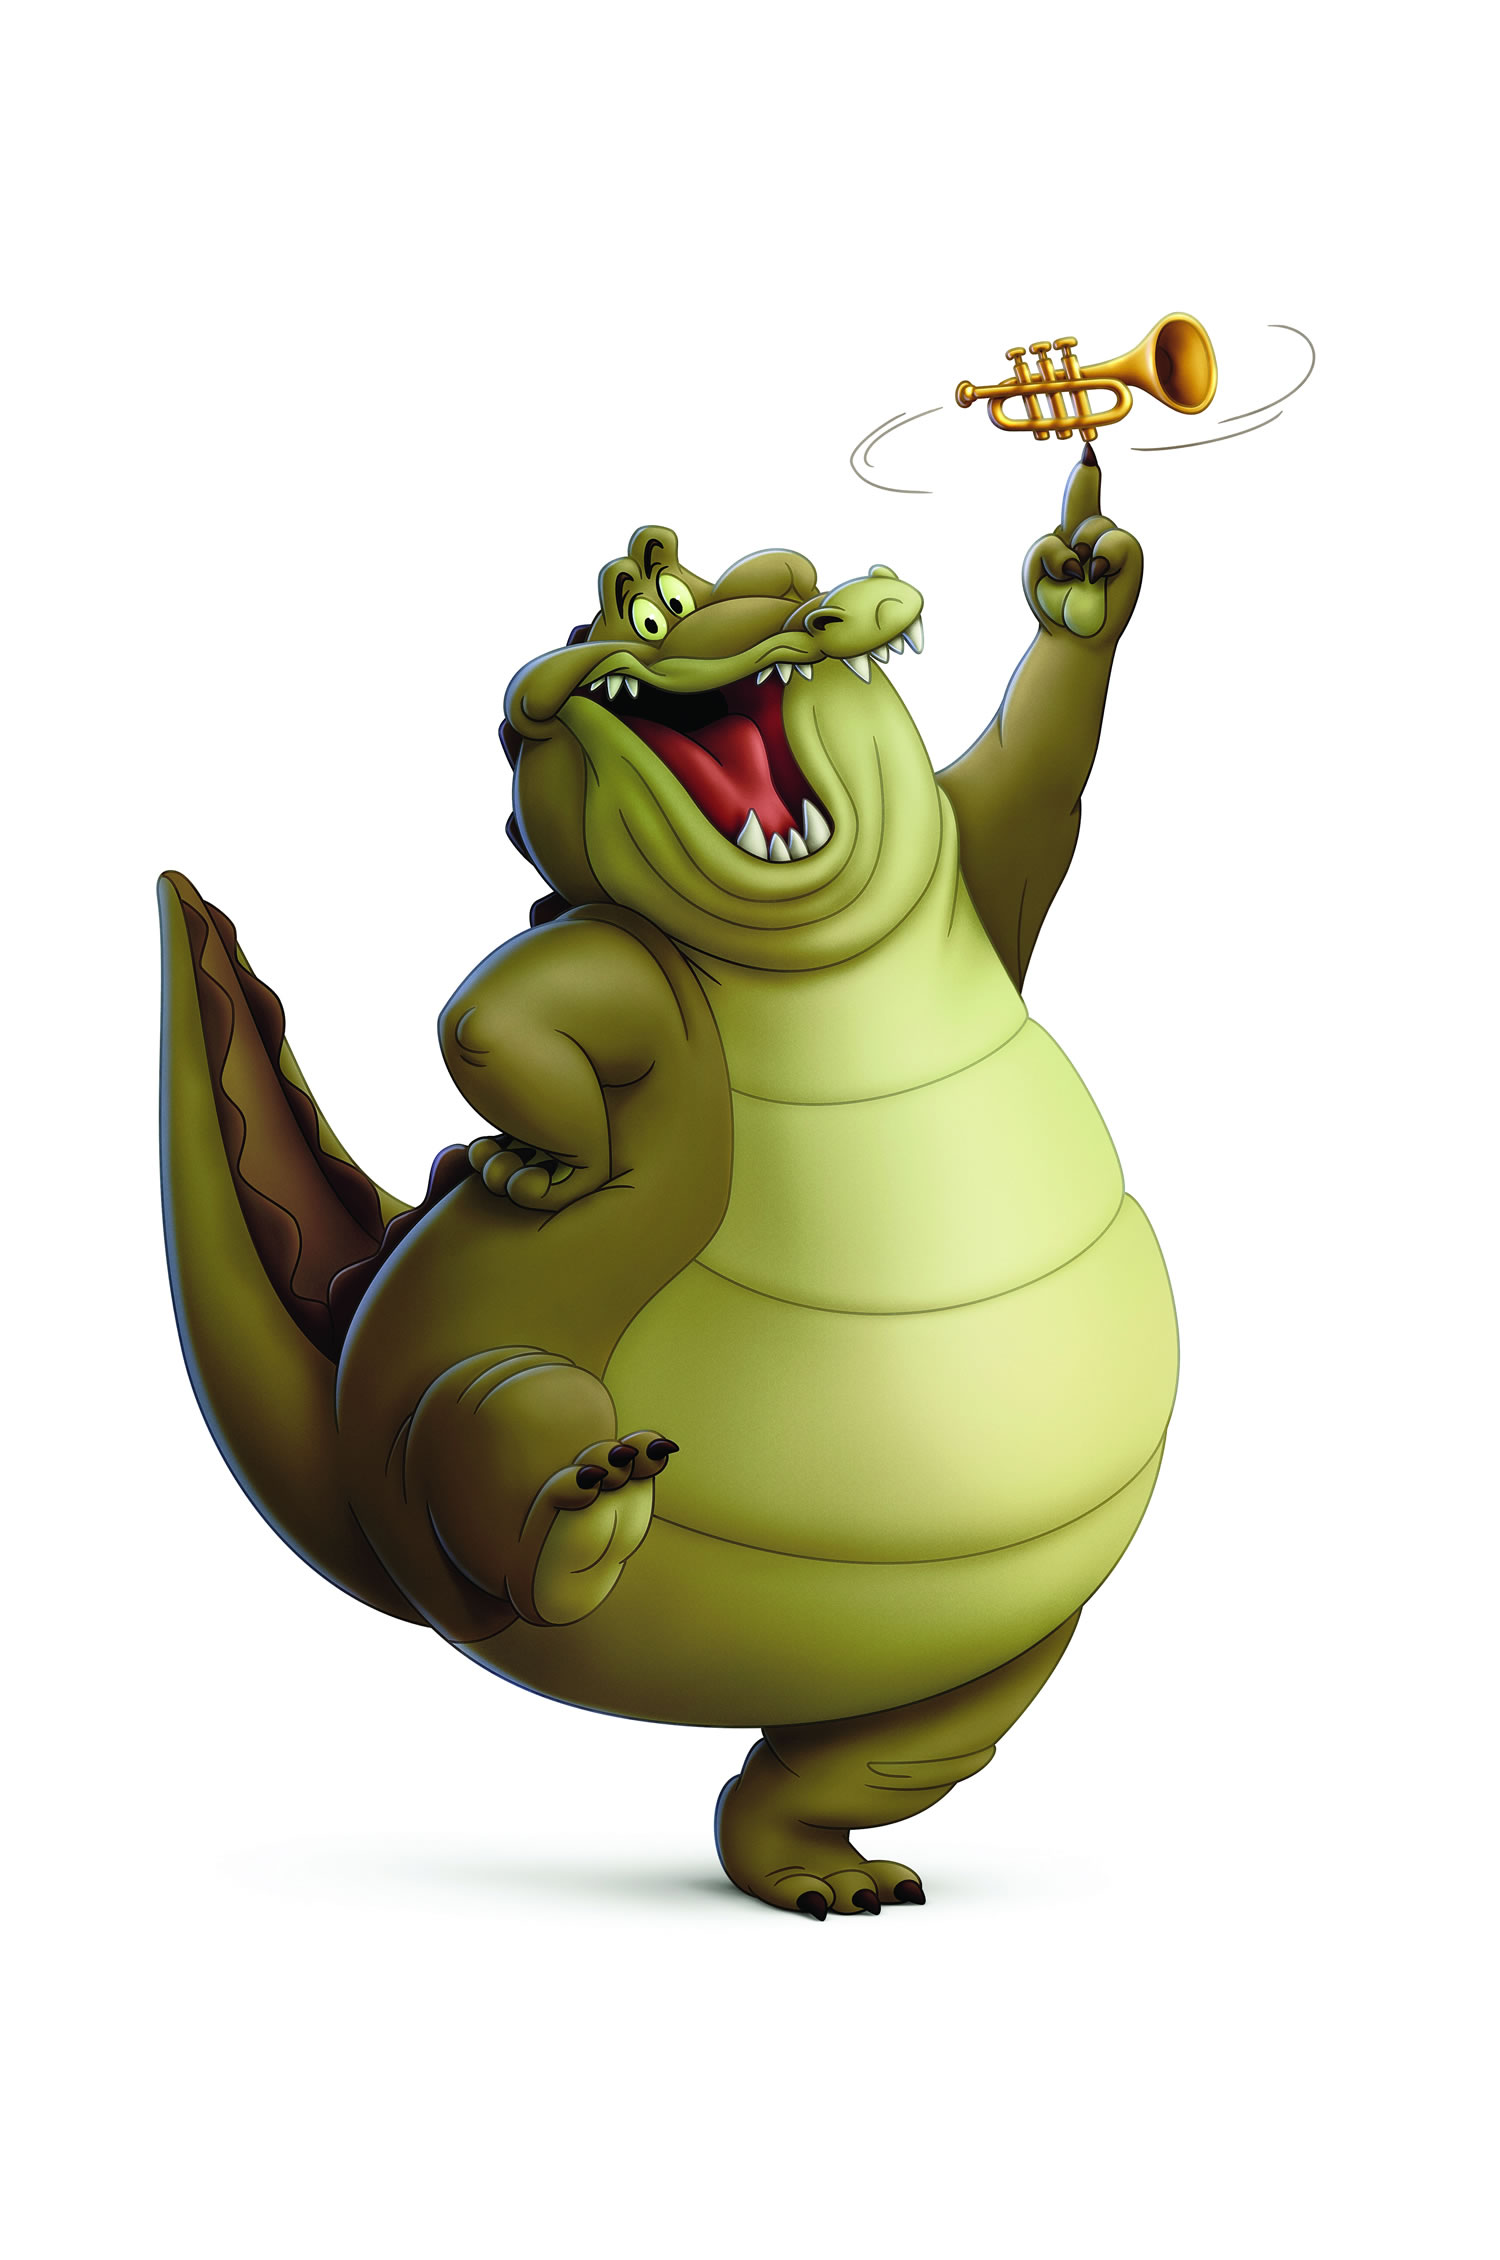 Louis The Gator From Disney S Princess And The Frog - Princess And The Frog Louis Voice Actor - HD Wallpaper 